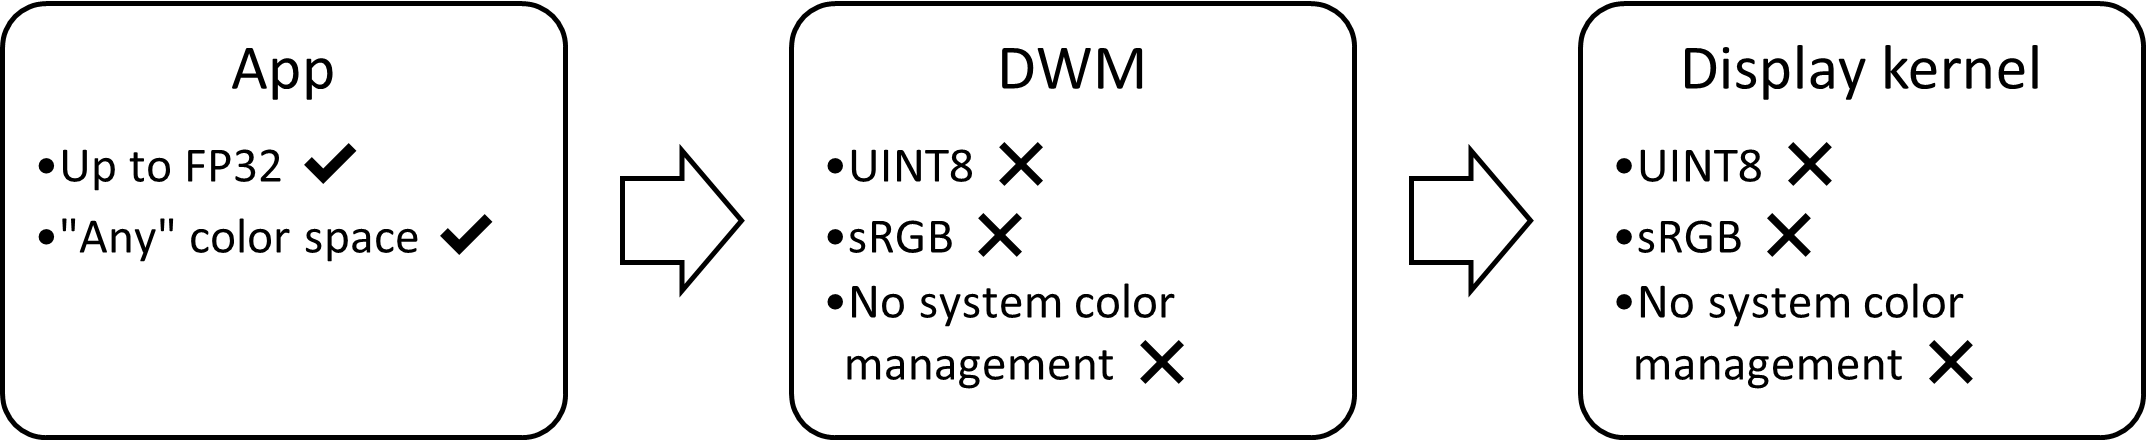 block diagram of SDR display stack: limited to sRGB, 8-bit, with no color management